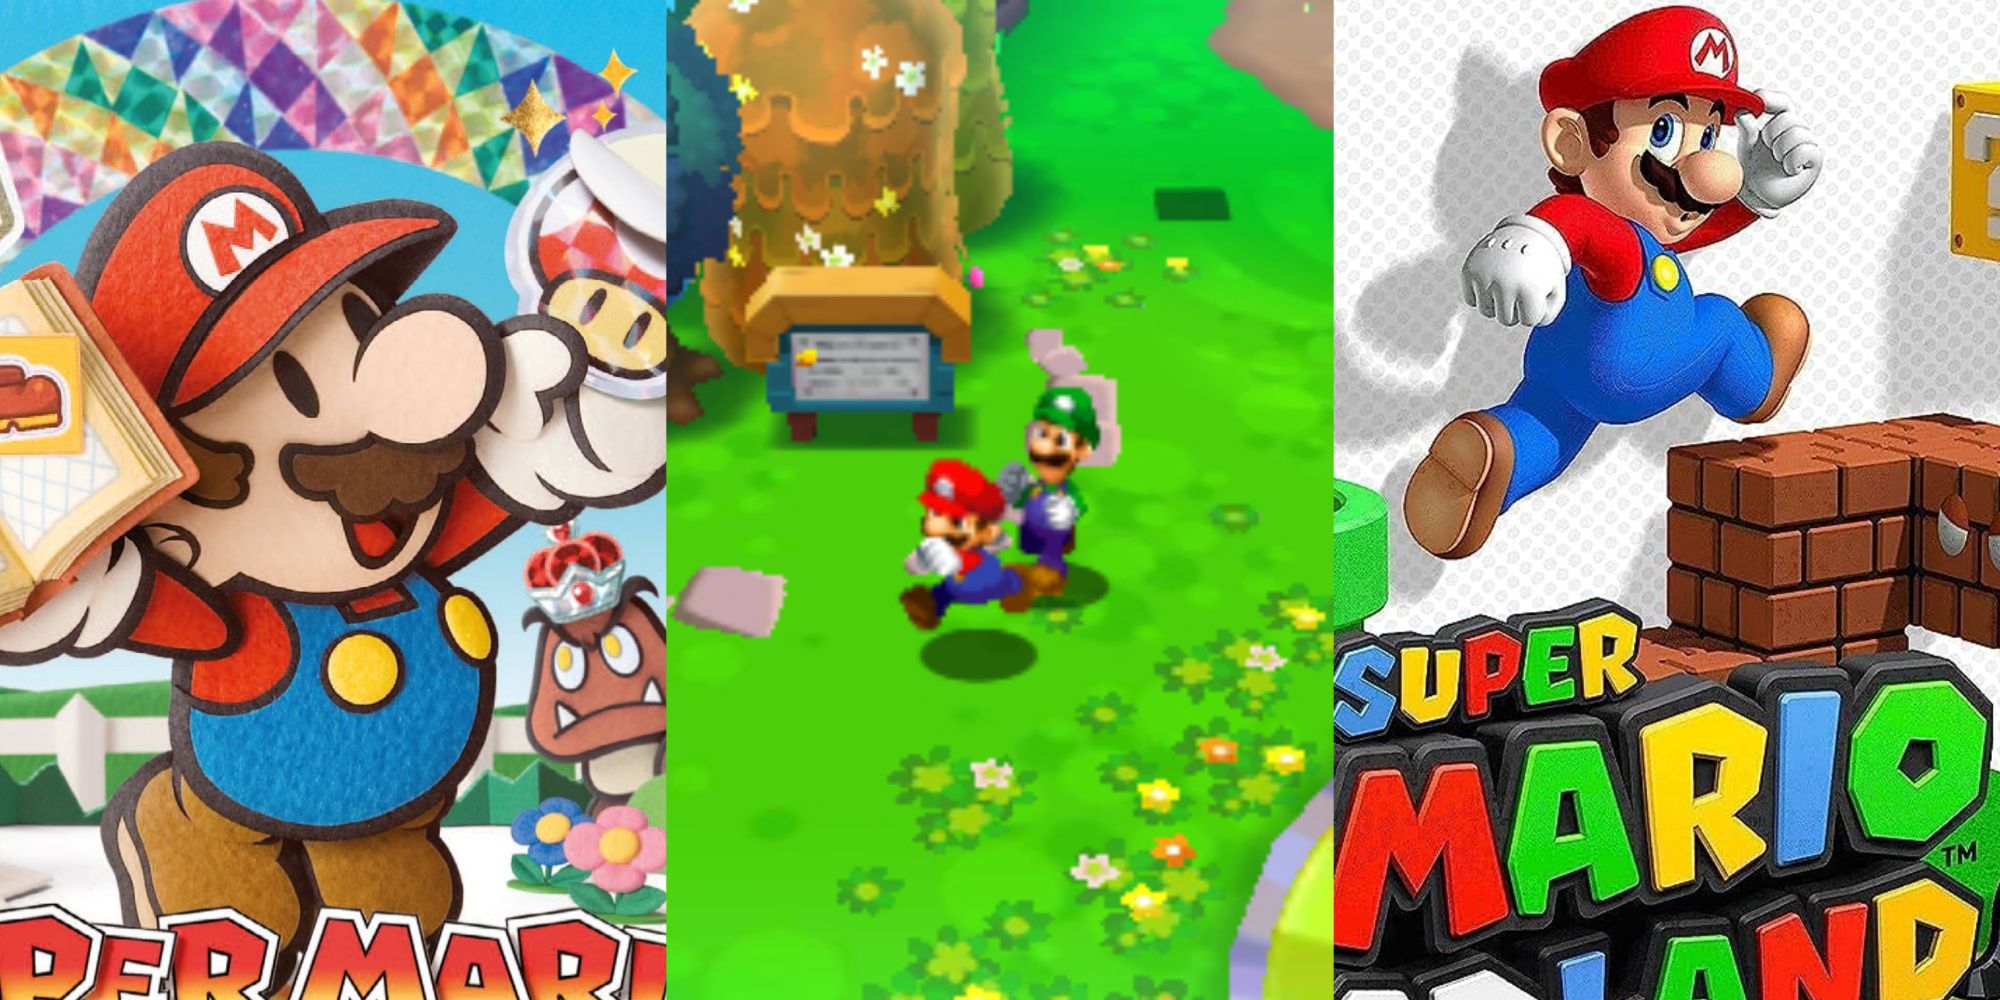 a collage of 3 mario games from the 3ds